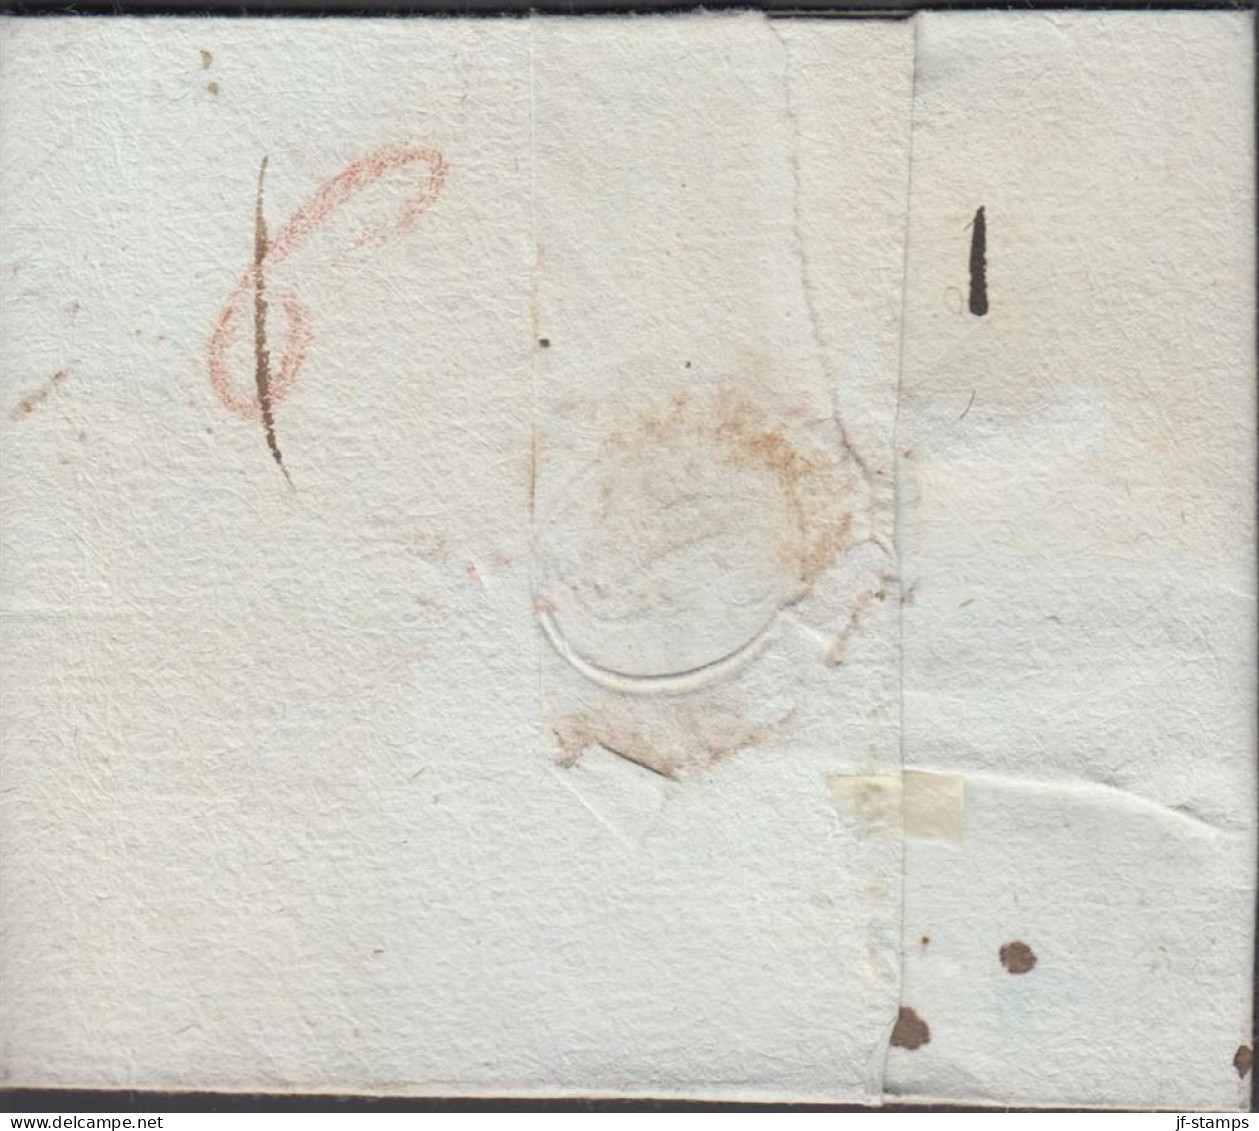 1821. DEUTSCHLAND. Fine Small Old Cover Cancelled WORMS 23 JUL 1821. Postage Marking In Brownred. More Tha... - JF436634 - Vorphilatelie